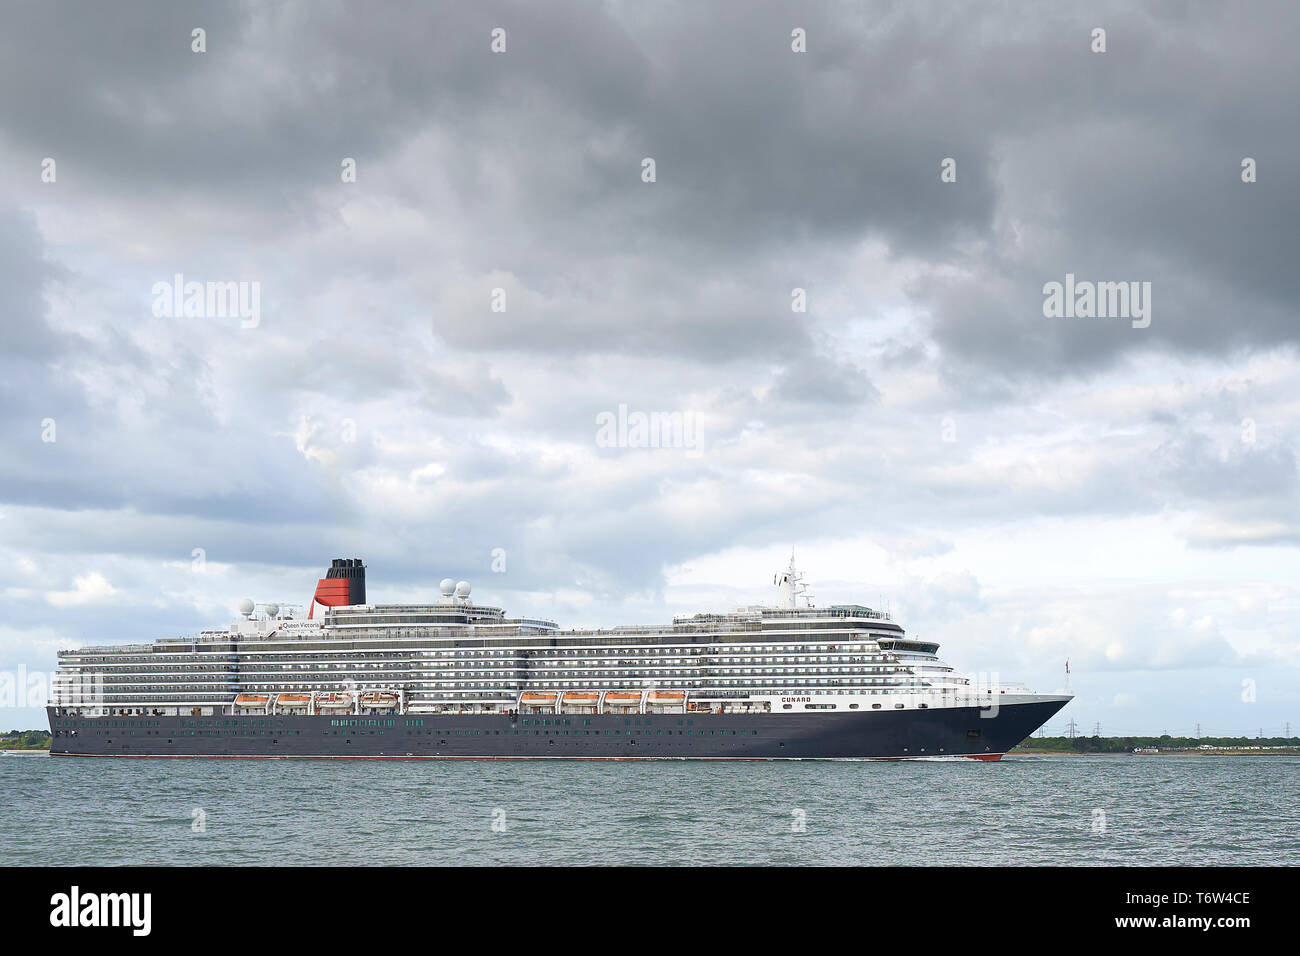 The Giant, Cunard Line, Cruise Ship, MS QUEEN VICTORIA, Passing Calshot Spit, As She Sails Out Of Southampton, UK, For Hamburg, Germany. 28 April 2019 Stock Photo